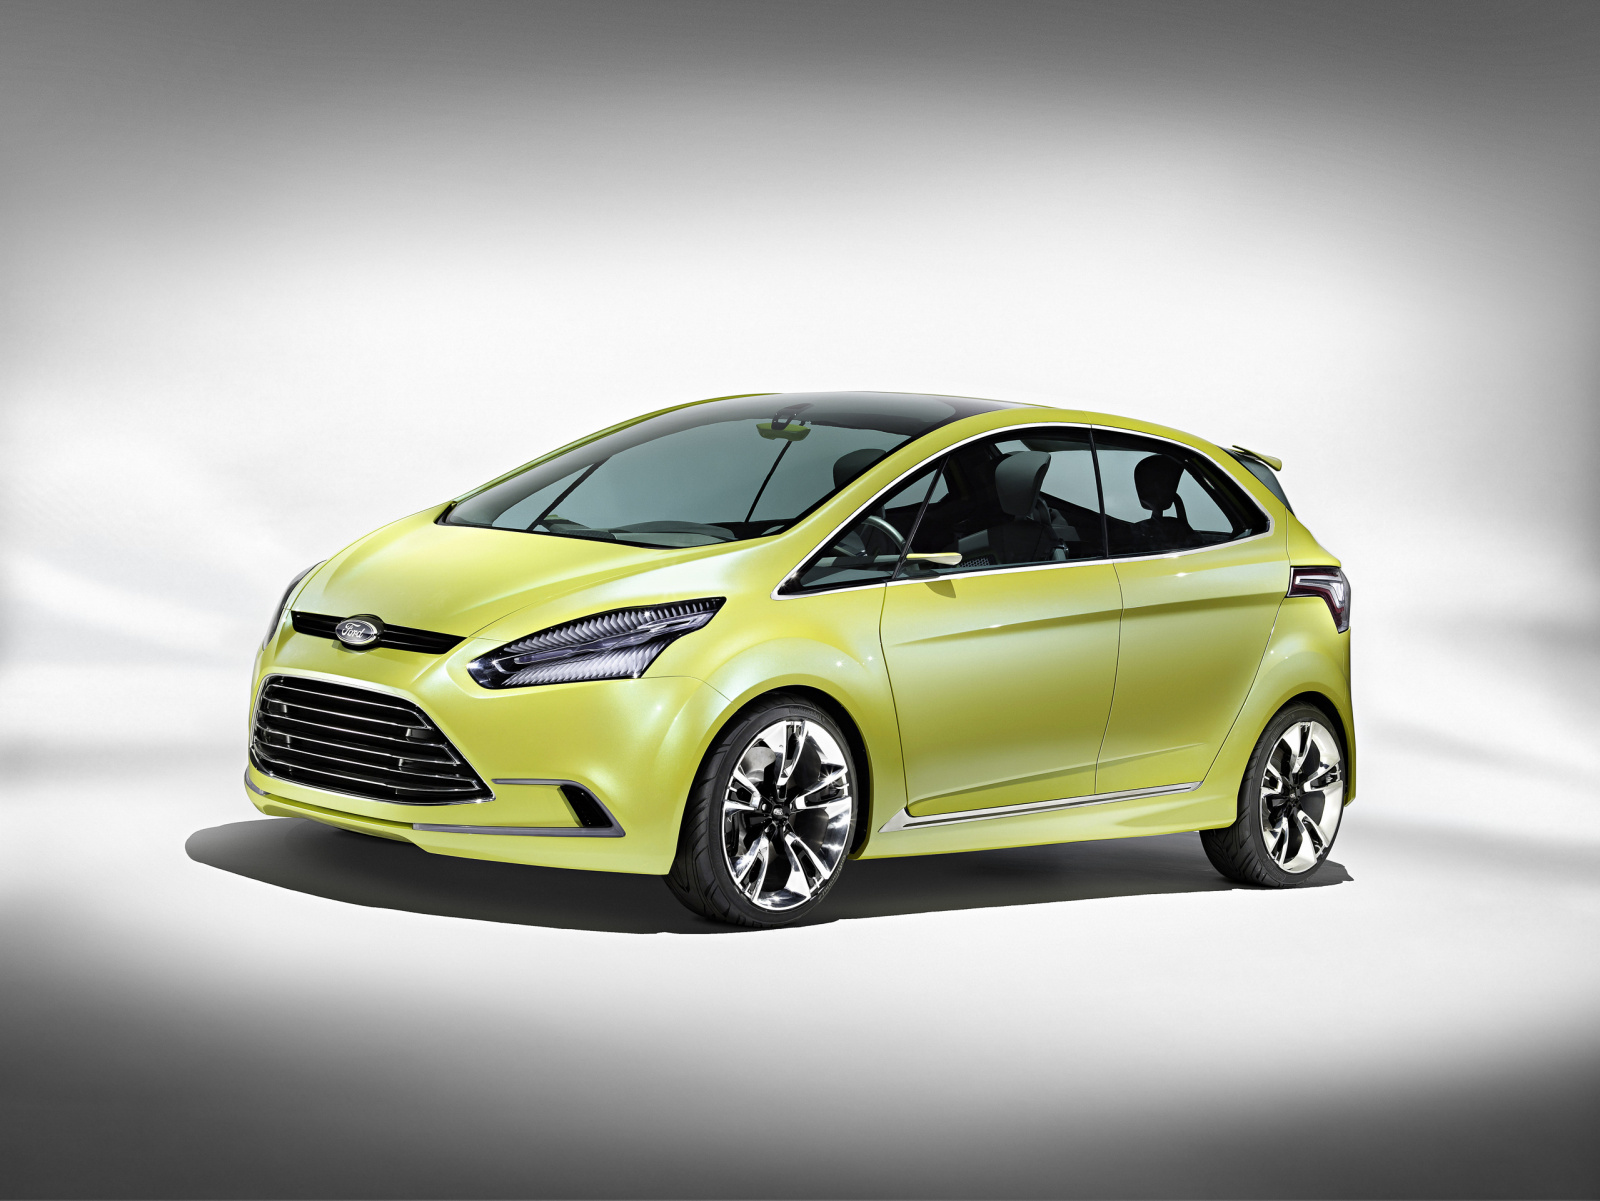 Ford Iosis-Max Concept - Foto eines Ford Concept-Cars